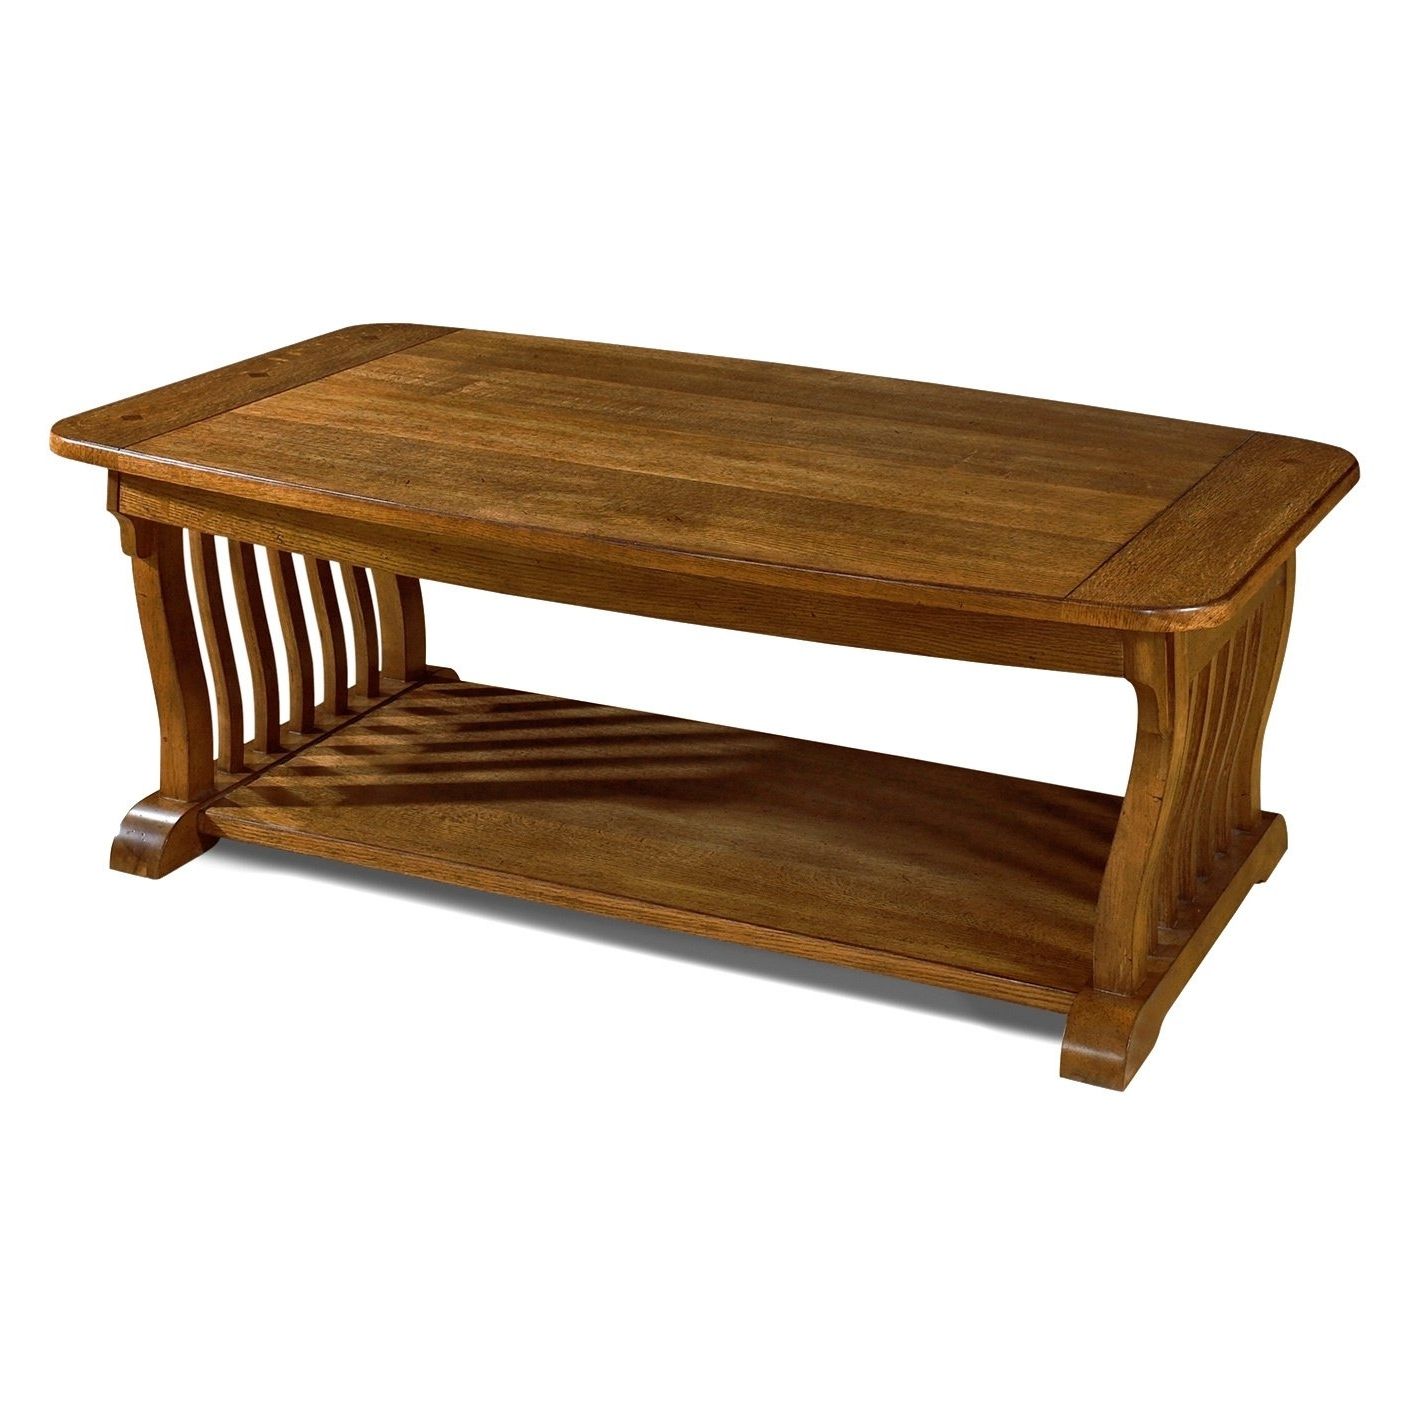 Shop Somerton Dwelling Craftsman Cocktail Table – Free Shipping Intended For Most Current Craftsman Cocktail Tables (View 6 of 20)